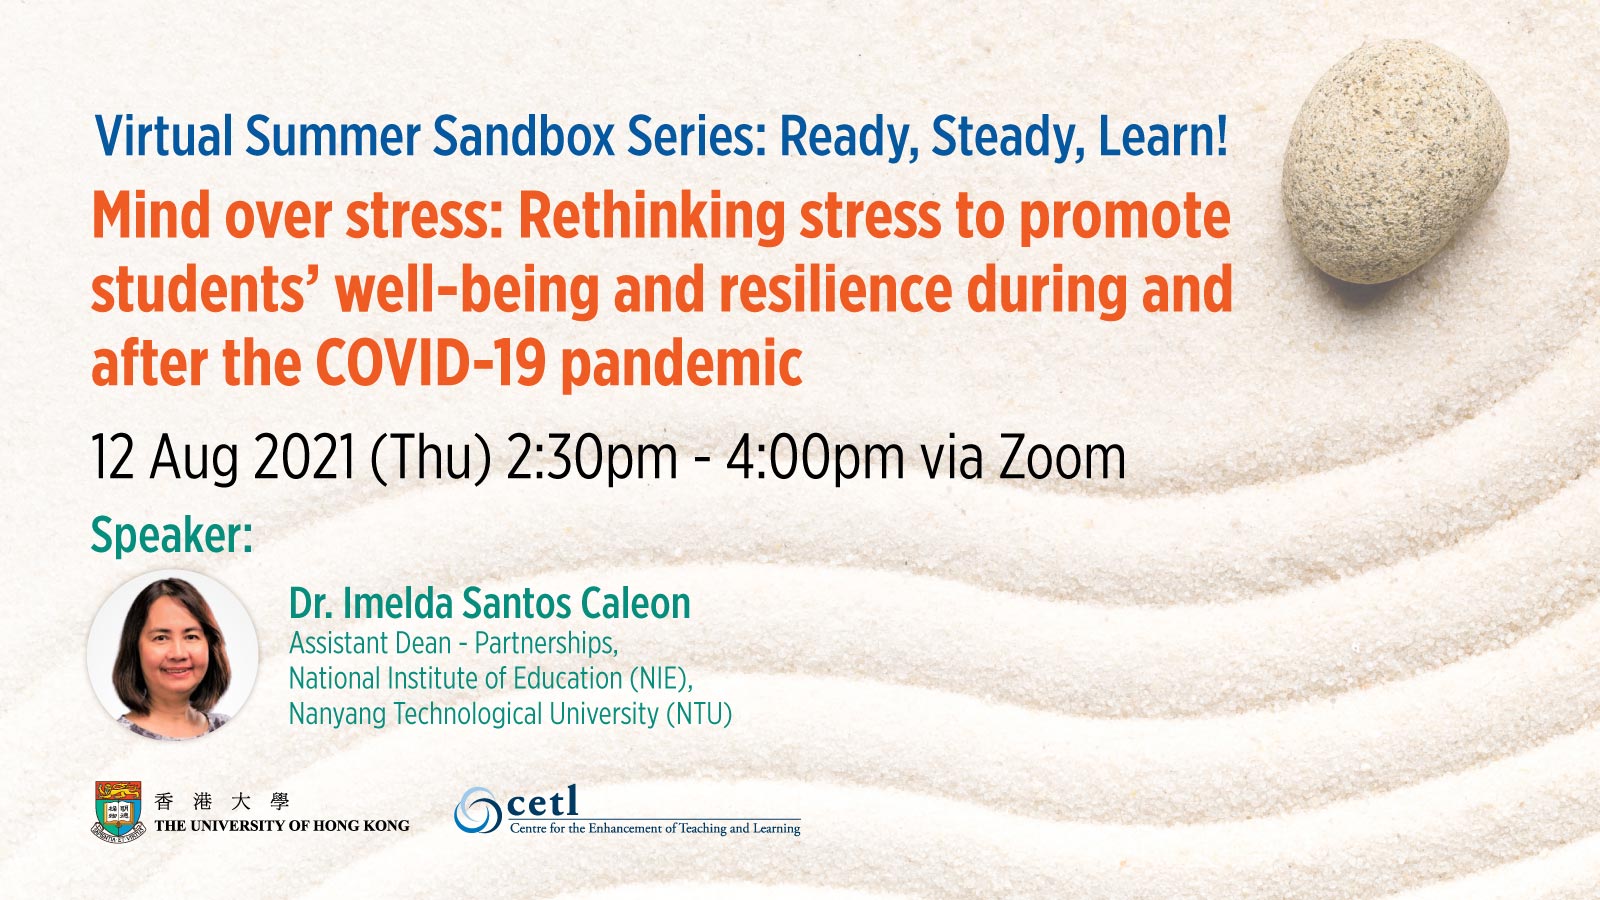 Session 3: Mind over stress: Rethinking stress to promote students’ well-being and resilience during and after the COVID-19 pandemic